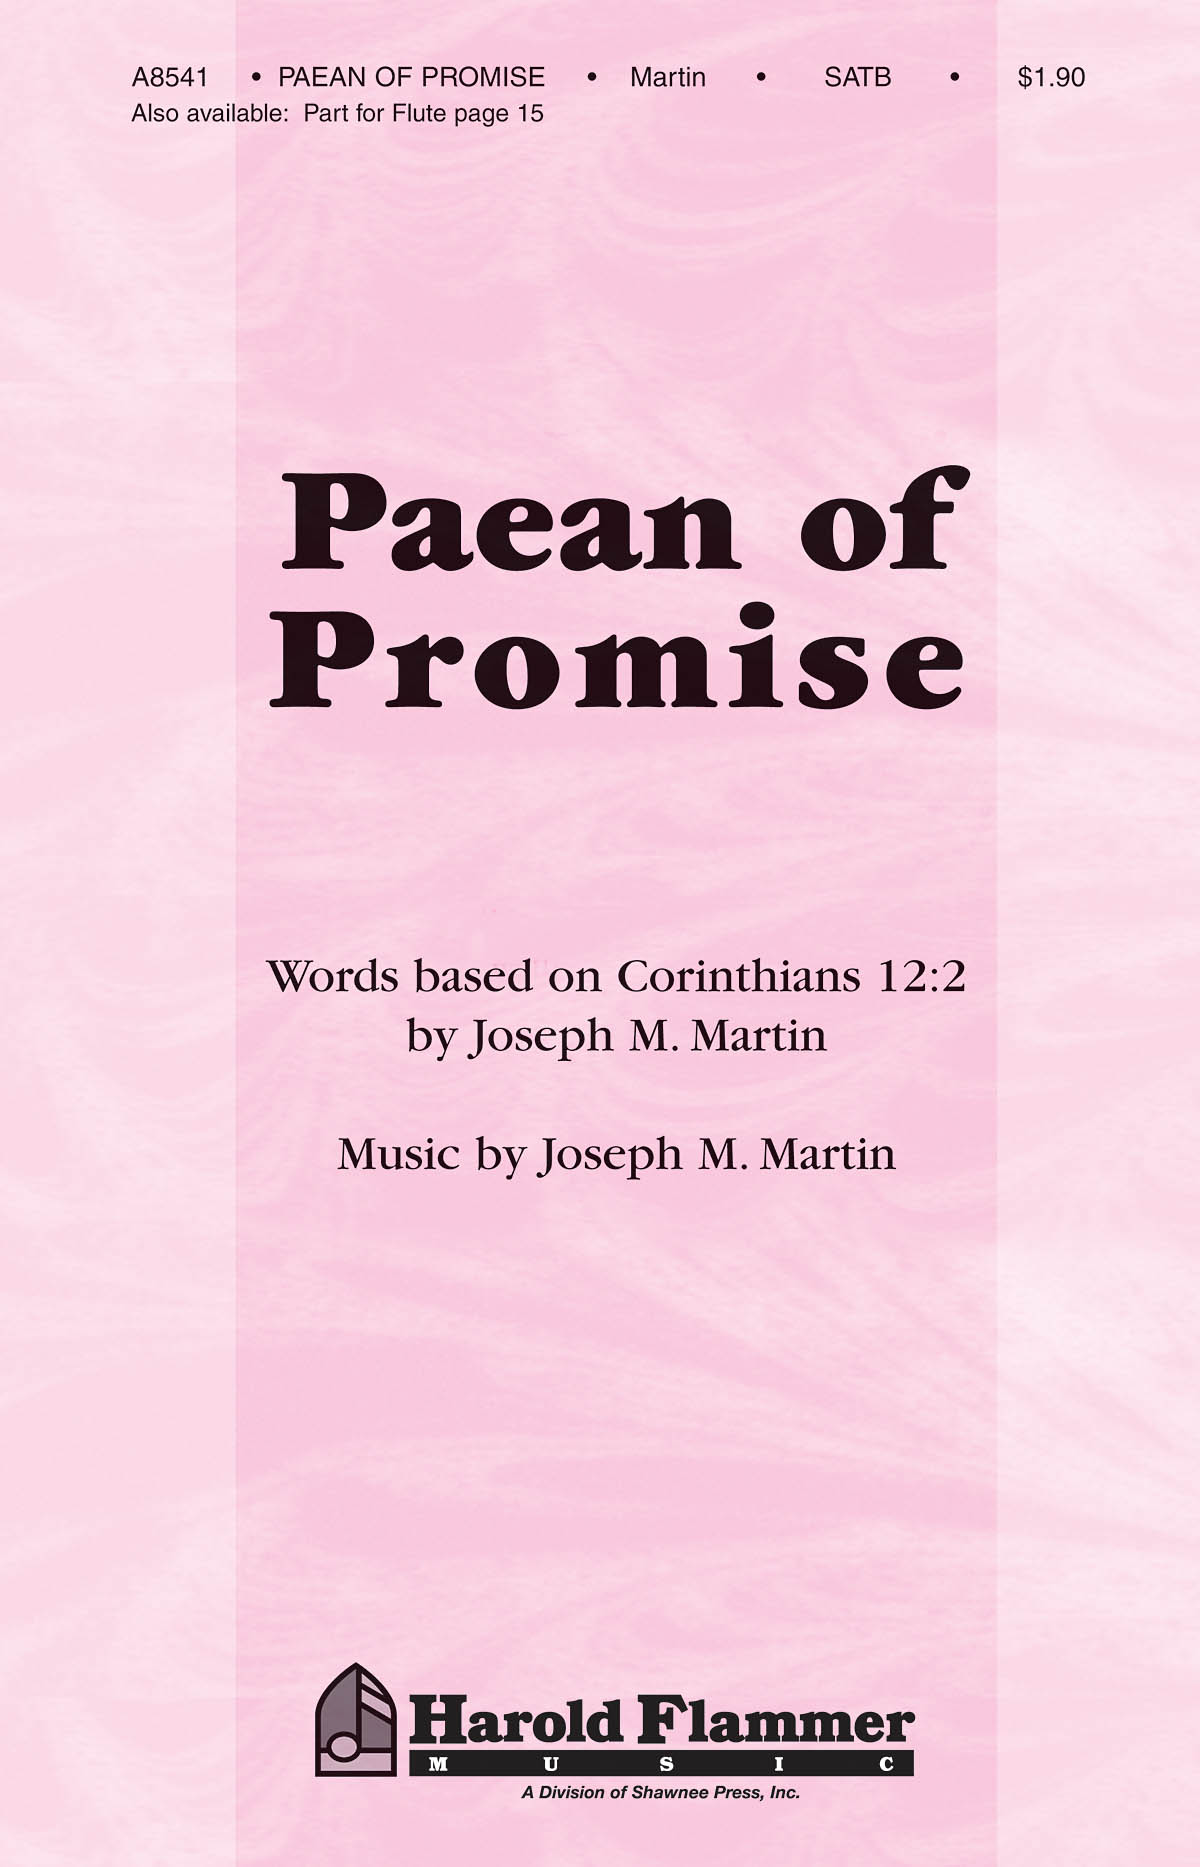 Paean of Promise